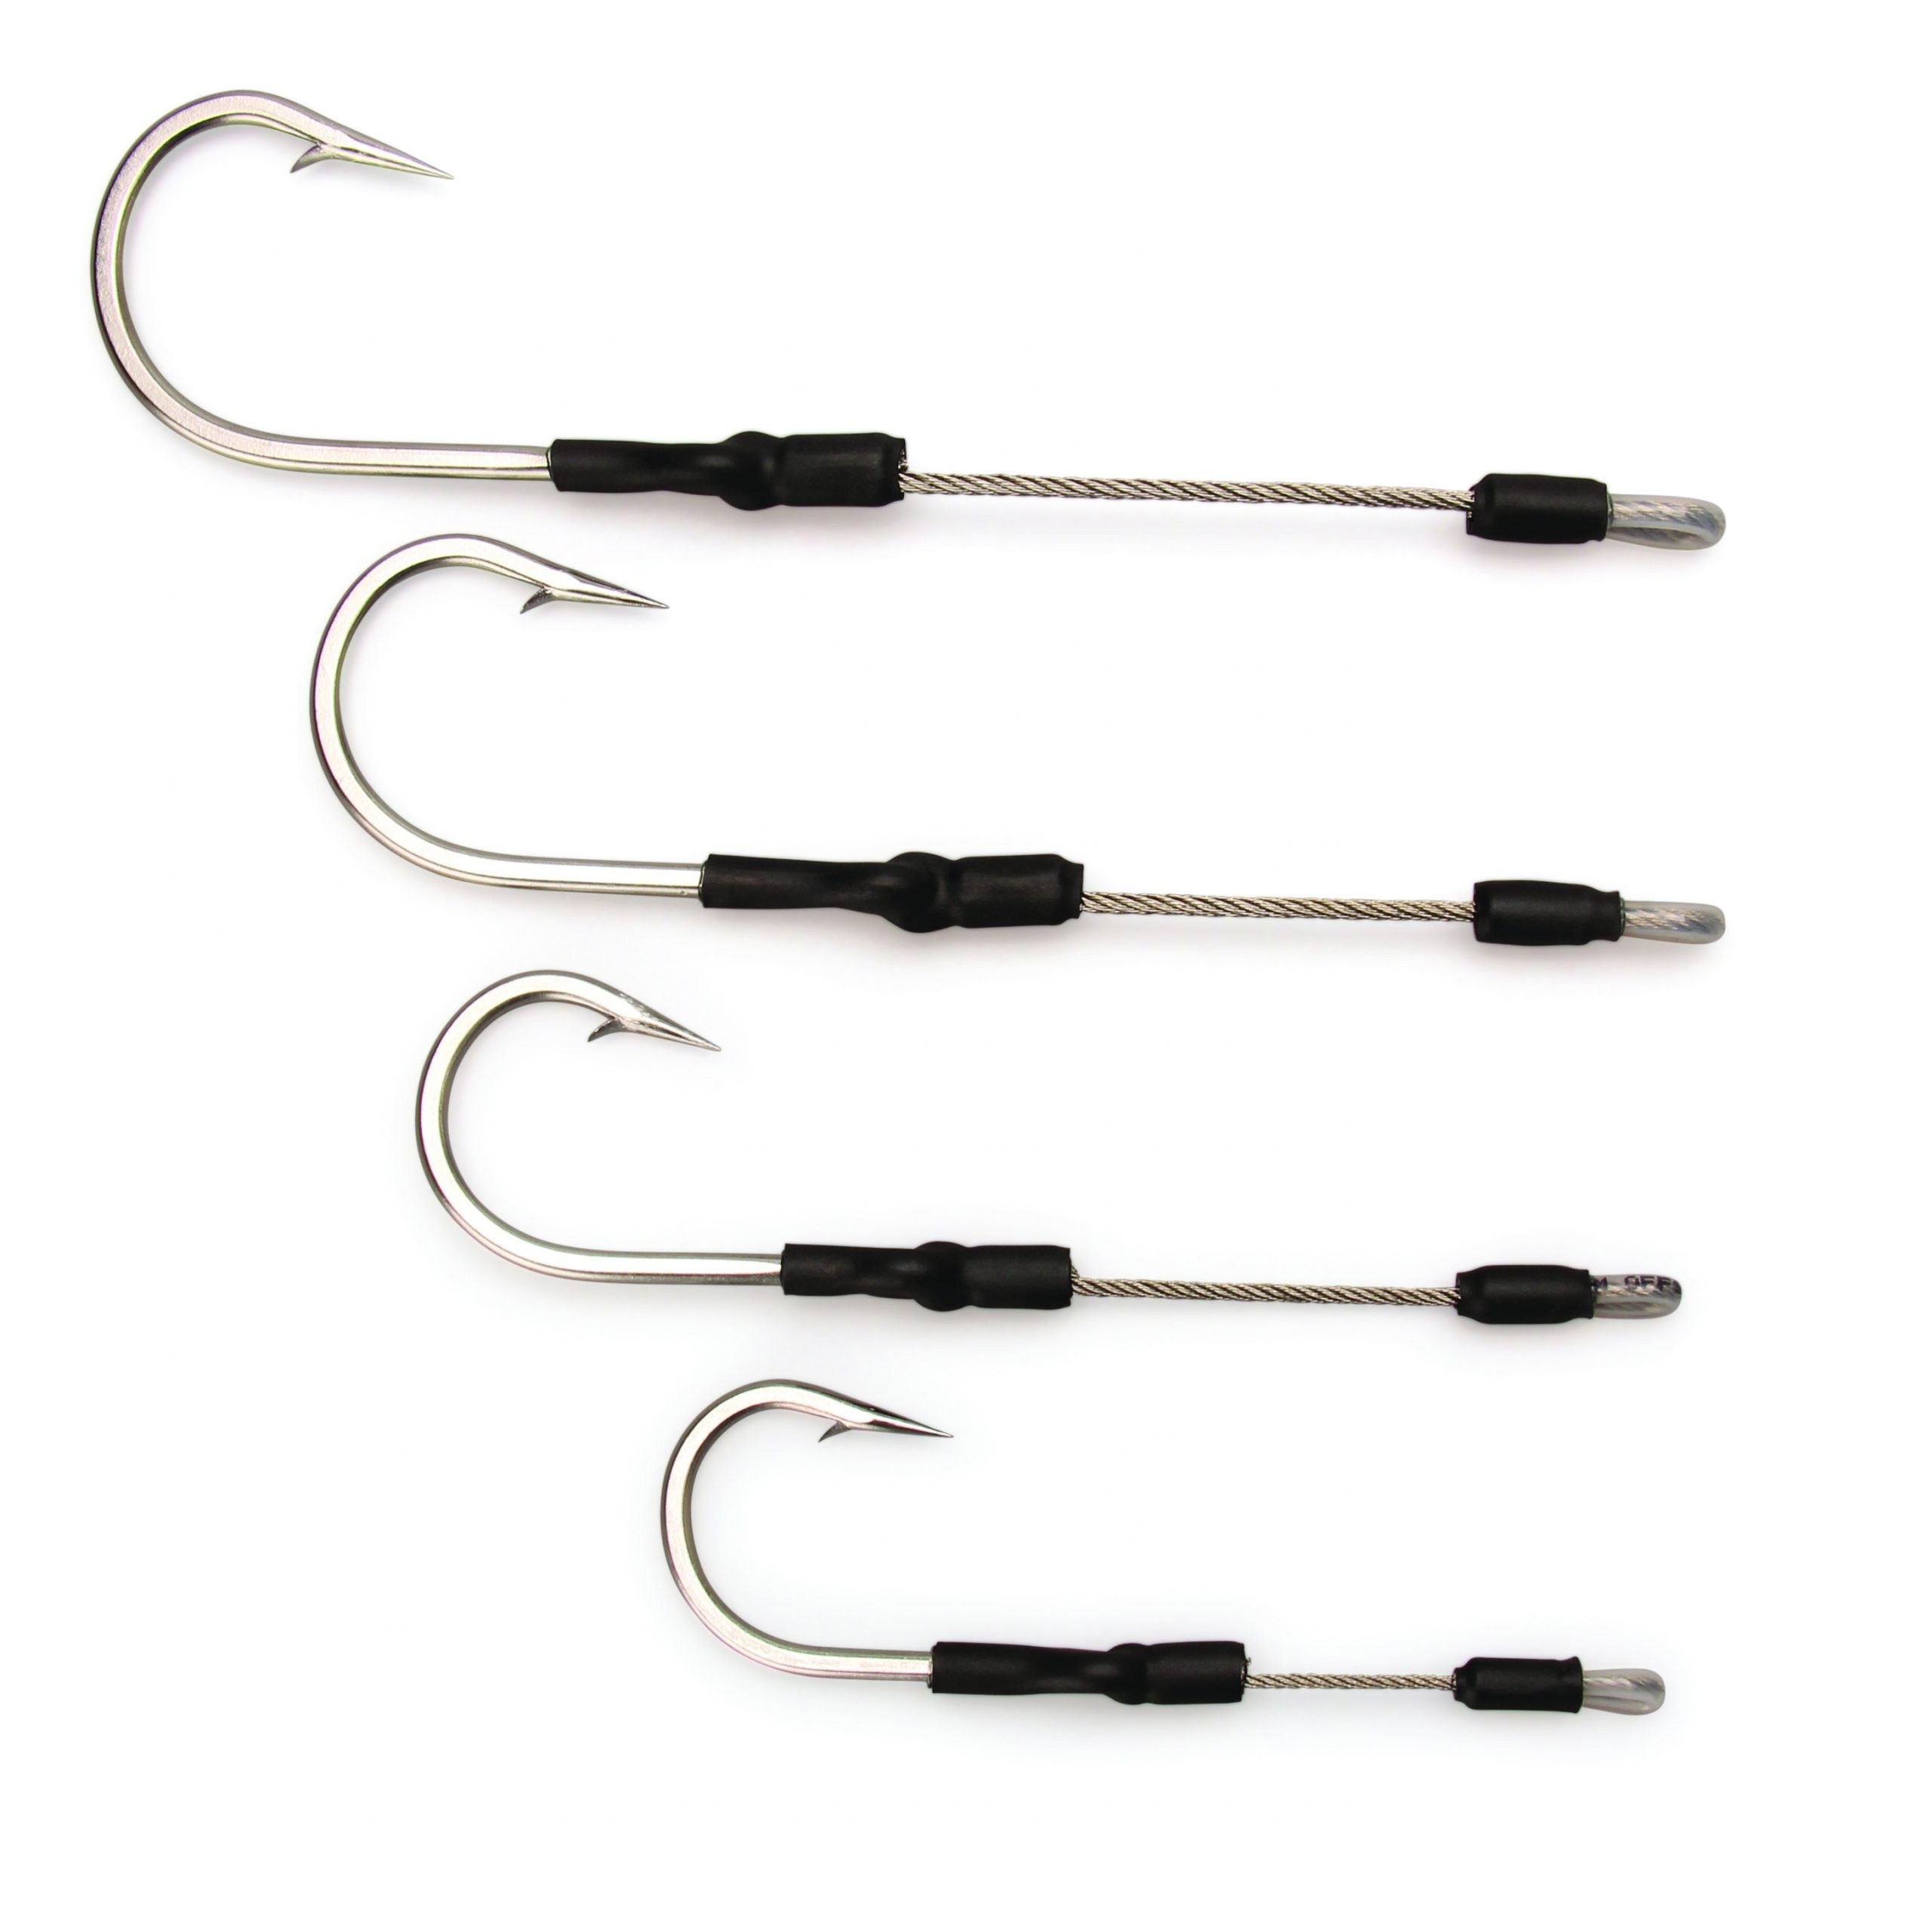 Fathom Offshore Stainless Hooksets - Fisherman's Outfitter